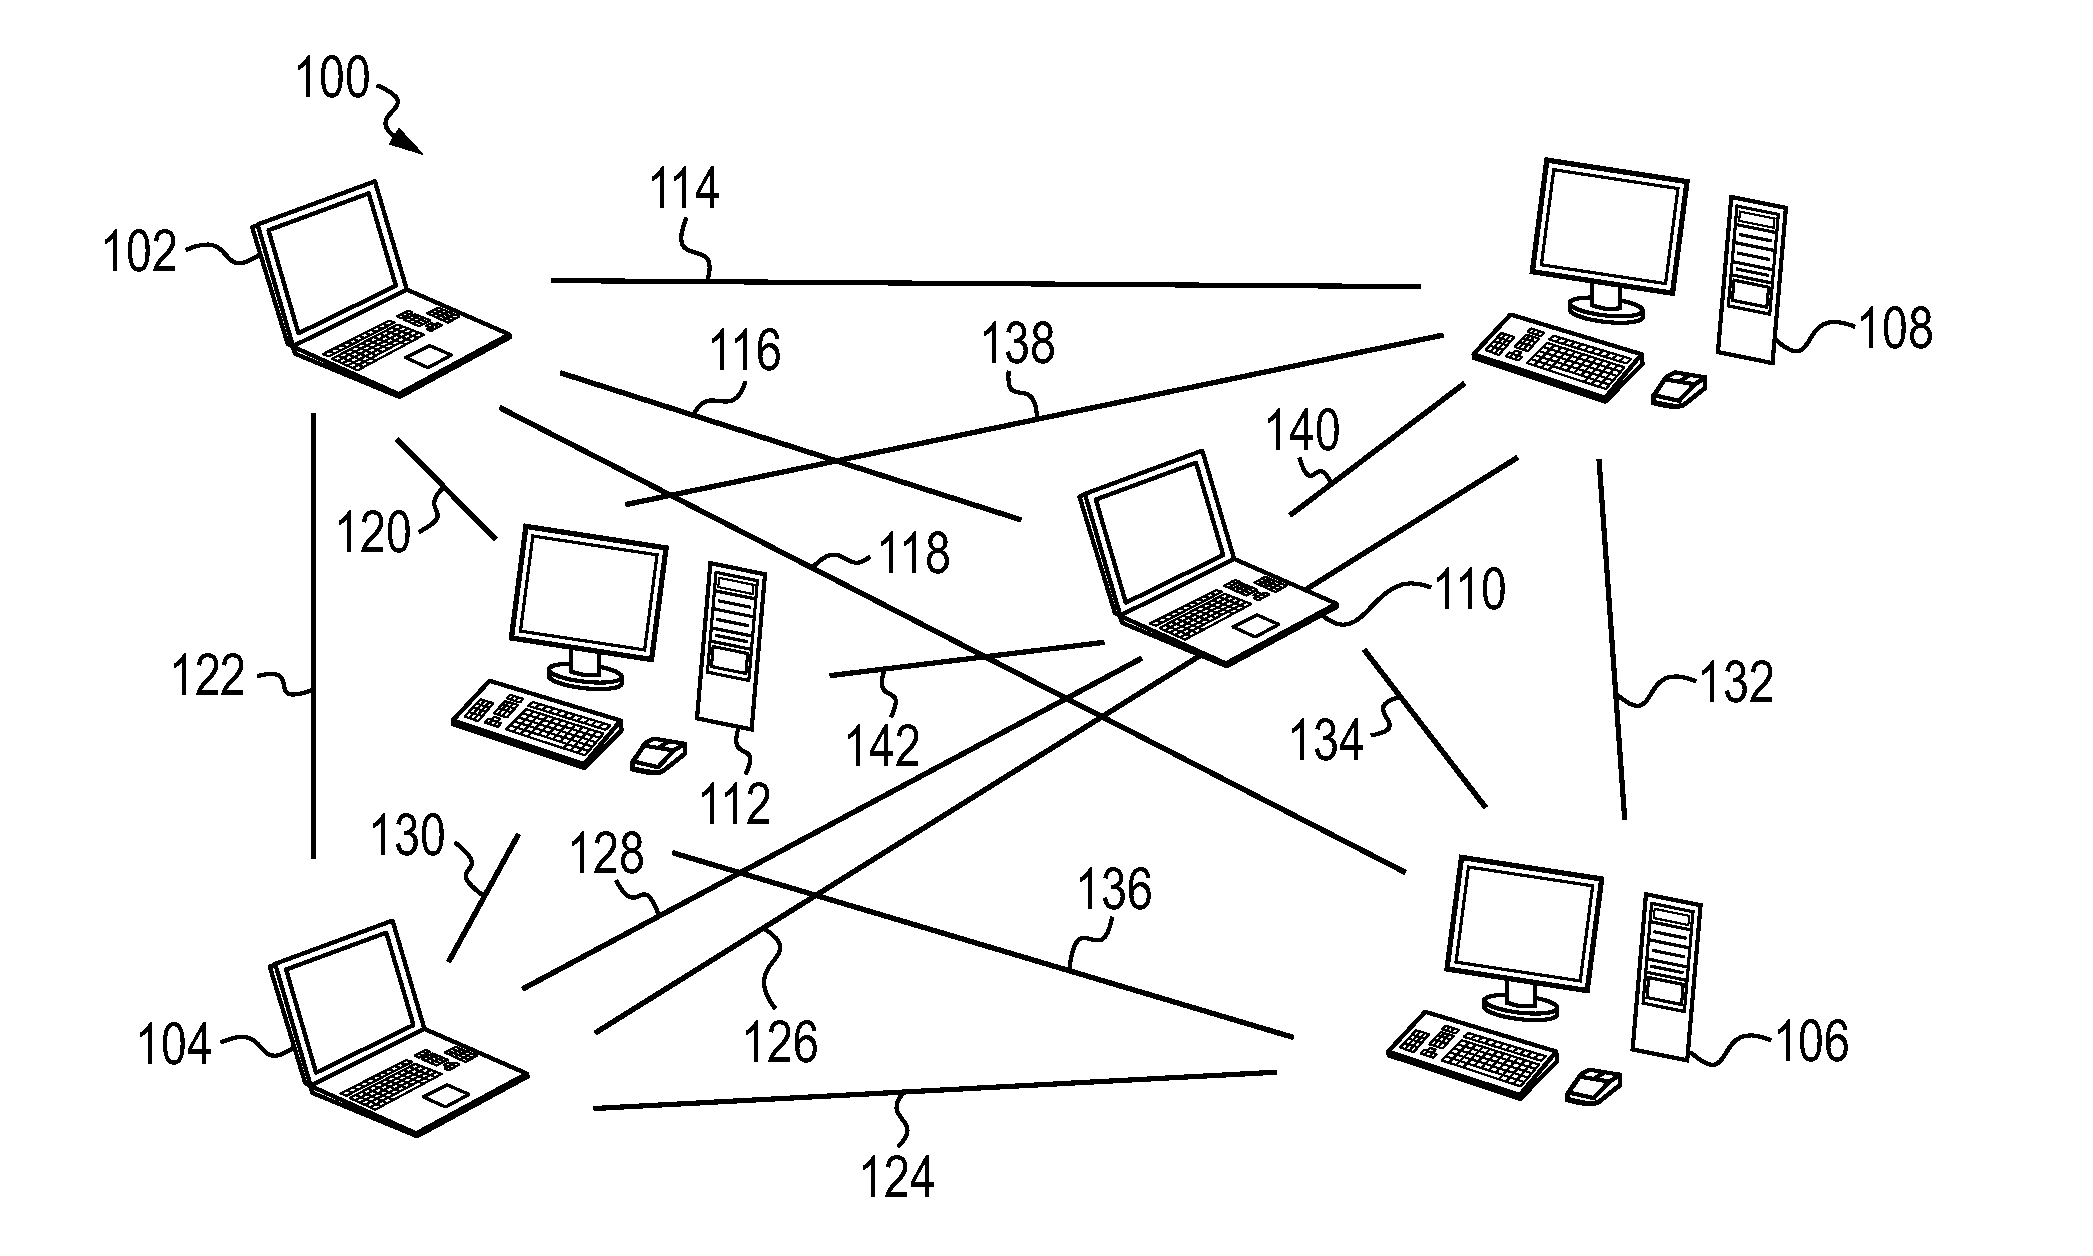 System and Methods for Distributed Medium Access Control and QOS Scheduling in Mobile Ad-Hoc Networks